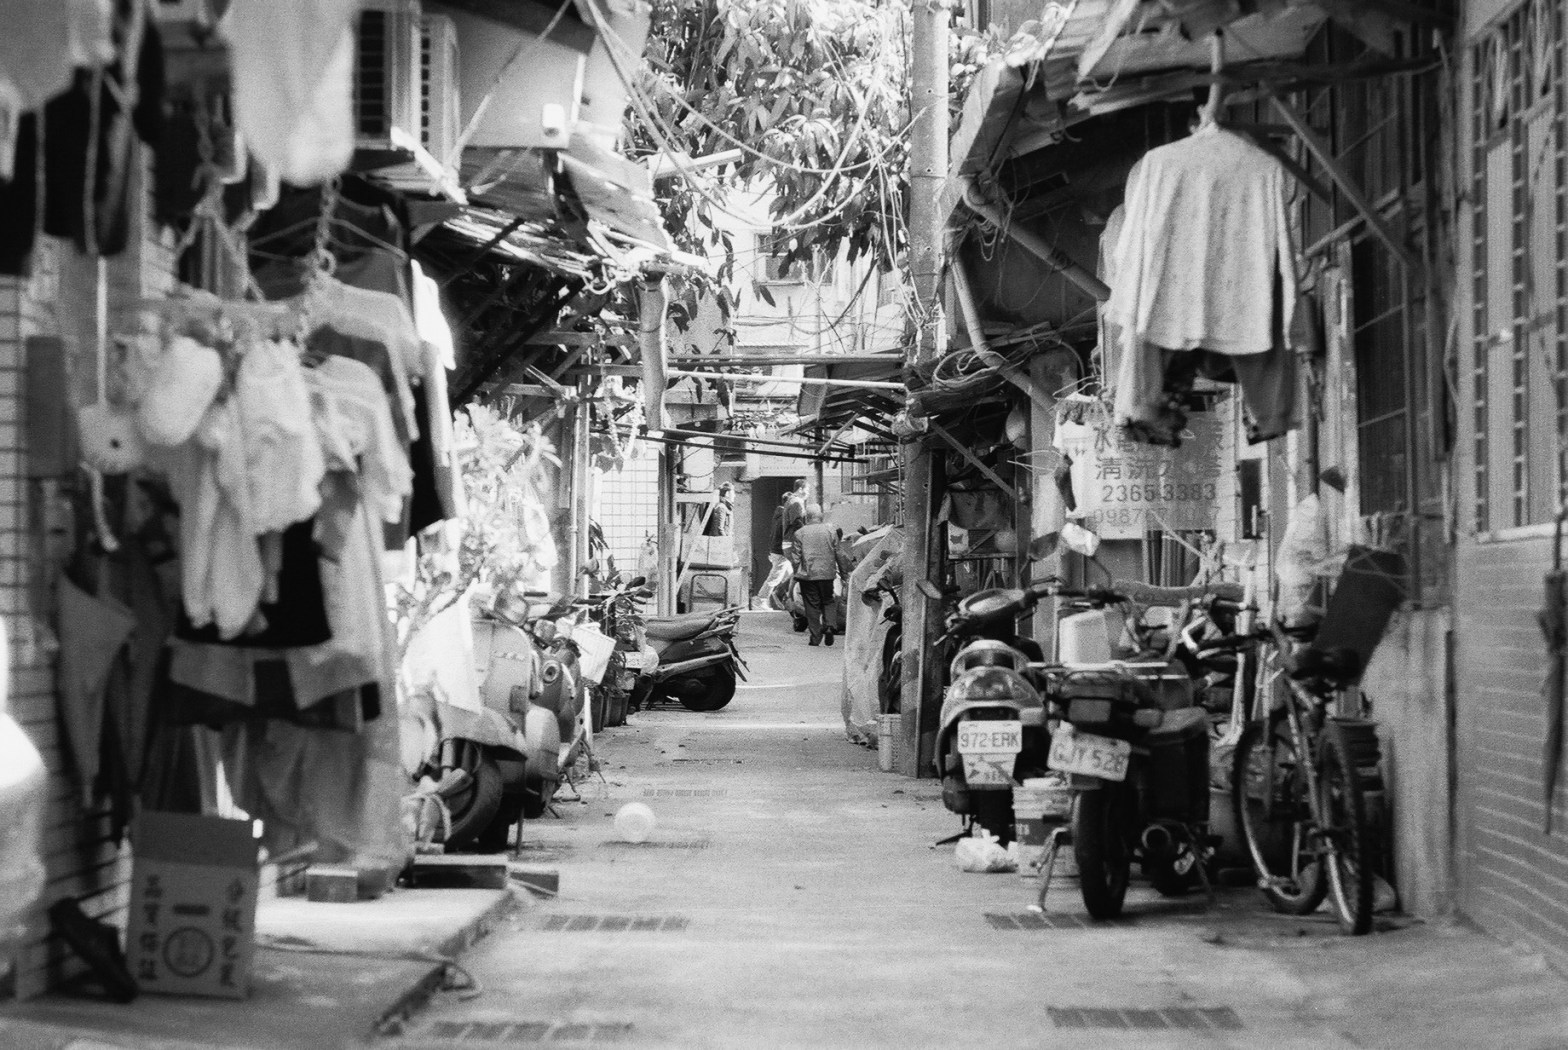 Photography: Laundry day – Shot on Fujifilm NEOPAN 100 SS at EI 200 (35mm Format)